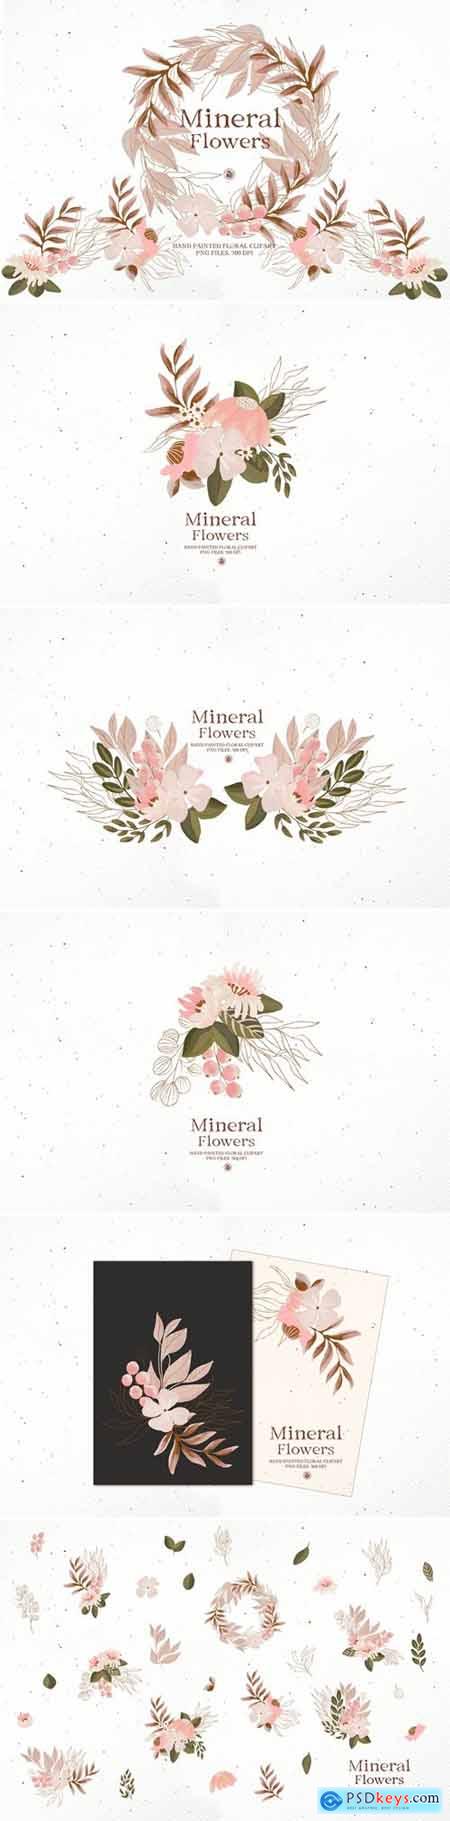 Mineral Flowers - hand painted floral clipart